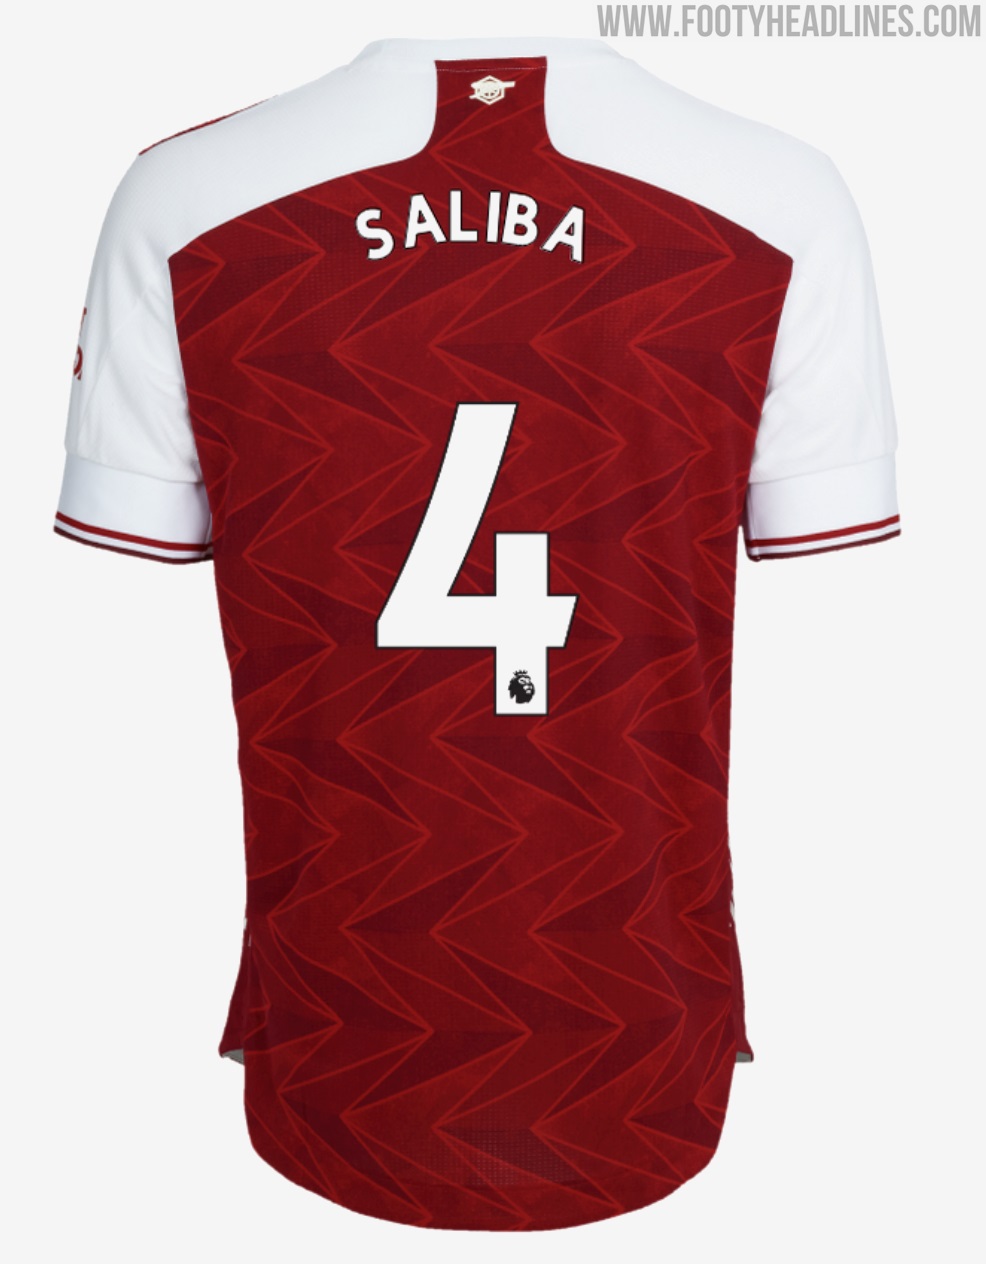 New Arsenal Fc 20 21 Squad Numbers Announced Footy Headlines